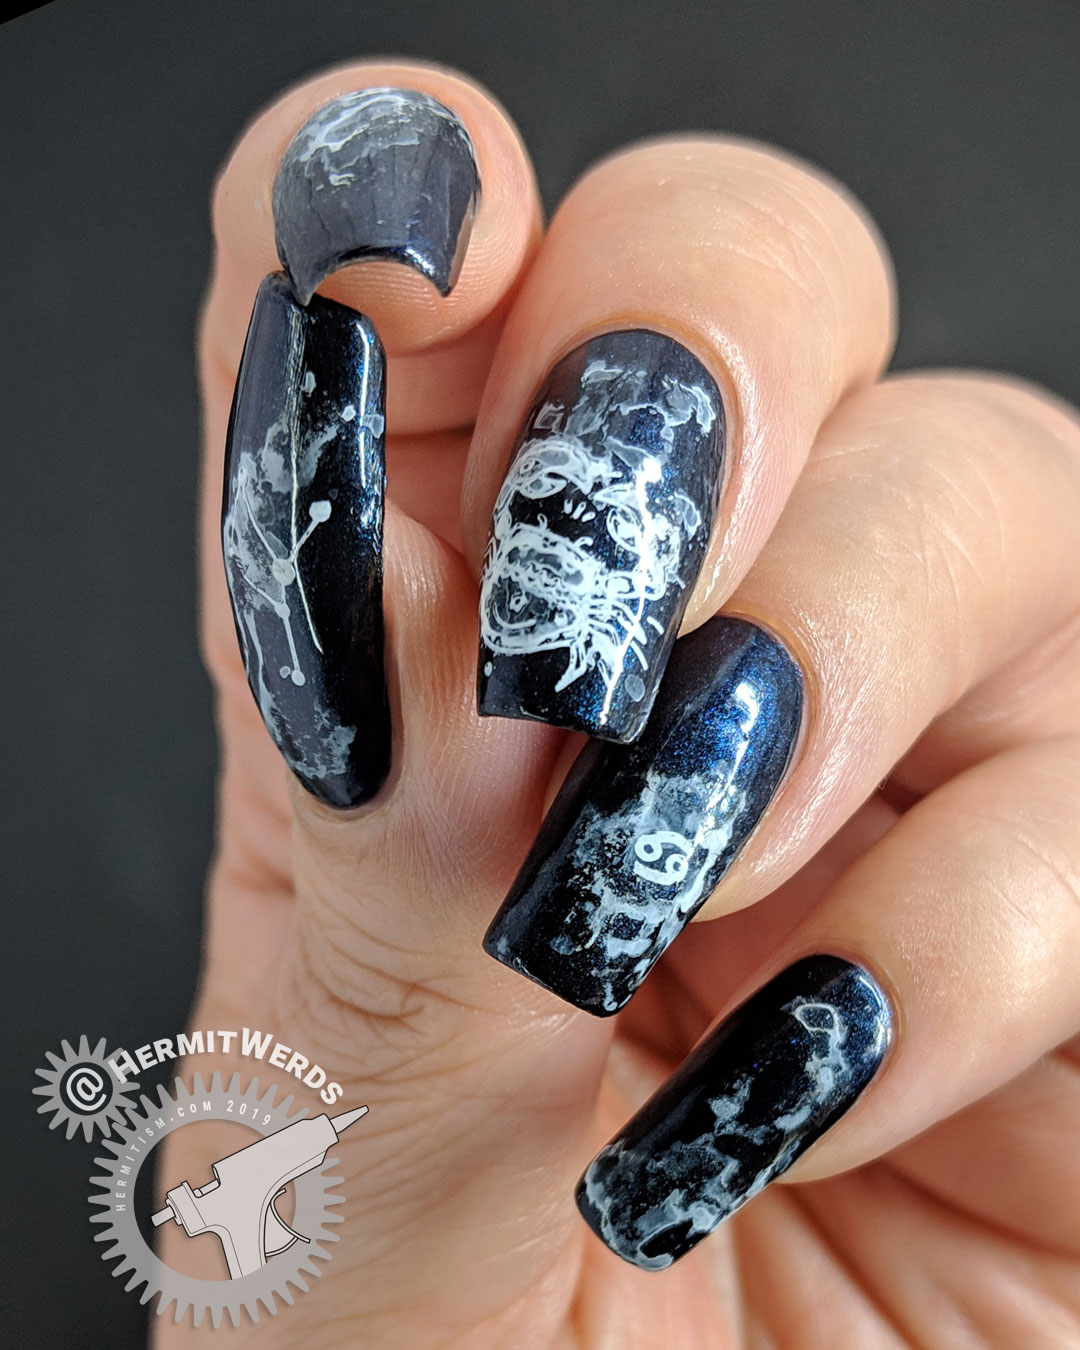 Ghost Crab of the Cosmos - Hermit Werds - deep blue nail art with crab and astrological Cancer symbol and ghostly white paint on top